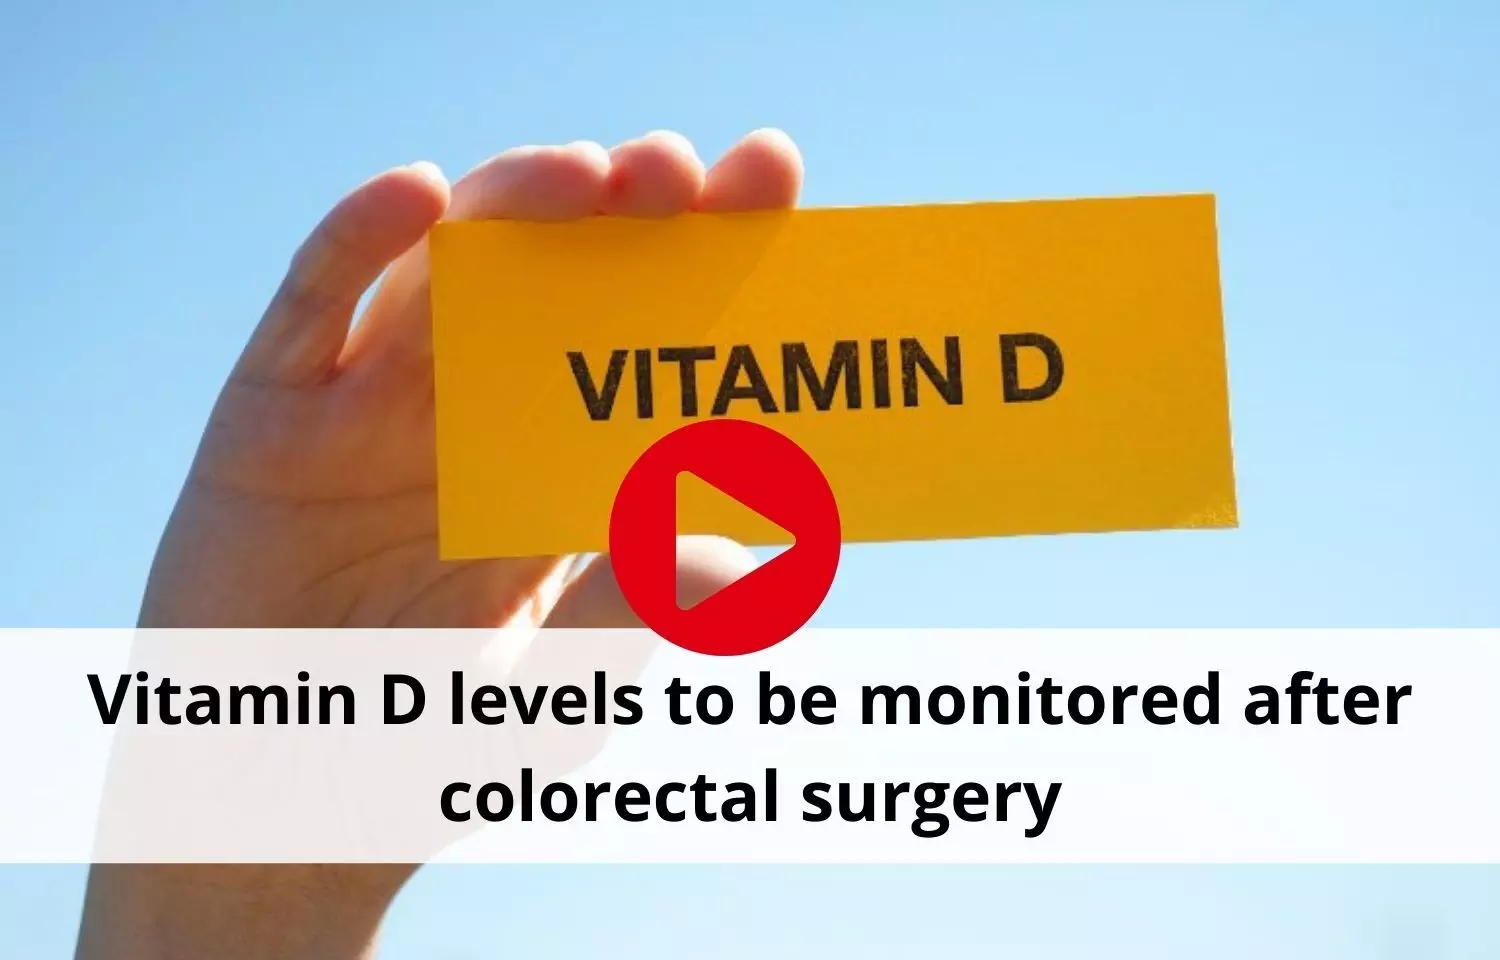 Vitamin D levels to be monitored after colorectal surgery